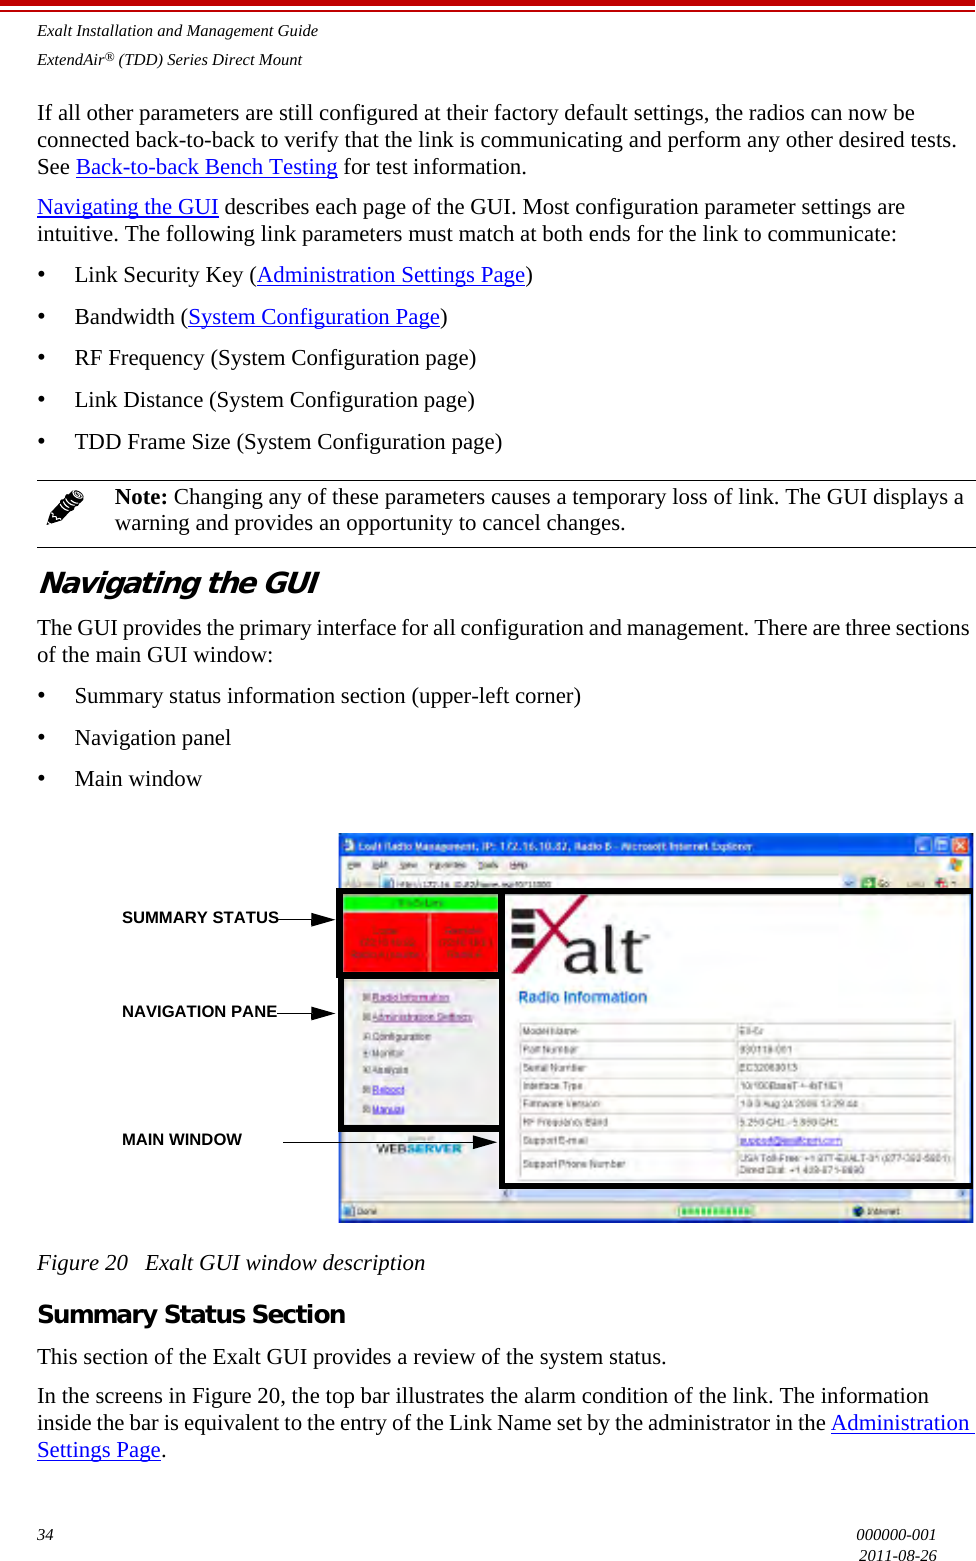 Exalt Installation and Management GuideExtendAir® (TDD) Series Direct Mount34 000000-0012011-08-26If all other parameters are still configured at their factory default settings, the radios can now be connected back-to-back to verify that the link is communicating and perform any other desired tests. See Back-to-back Bench Testing for test information.Navigating the GUI describes each page of the GUI. Most configuration parameter settings are intuitive. The following link parameters must match at both ends for the link to communicate:•Link Security Key (Administration Settings Page)•Bandwidth (System Configuration Page)•RF Frequency (System Configuration page)•Link Distance (System Configuration page)•TDD Frame Size (System Configuration page)Navigating the GUIThe GUI provides the primary interface for all configuration and management. There are three sections of the main GUI window:•Summary status information section (upper-left corner)•Navigation panel •Main windowFigure 20   Exalt GUI window descriptionSummary Status SectionThis section of the Exalt GUI provides a review of the system status. In the screens in Figure 20, the top bar illustrates the alarm condition of the link. The information inside the bar is equivalent to the entry of the Link Name set by the administrator in the Administration Settings Page.Note: Changing any of these parameters causes a temporary loss of link. The GUI displays a warning and provides an opportunity to cancel changes.SUMMARY STATUSNAVIGATION PANEMAIN WINDOW